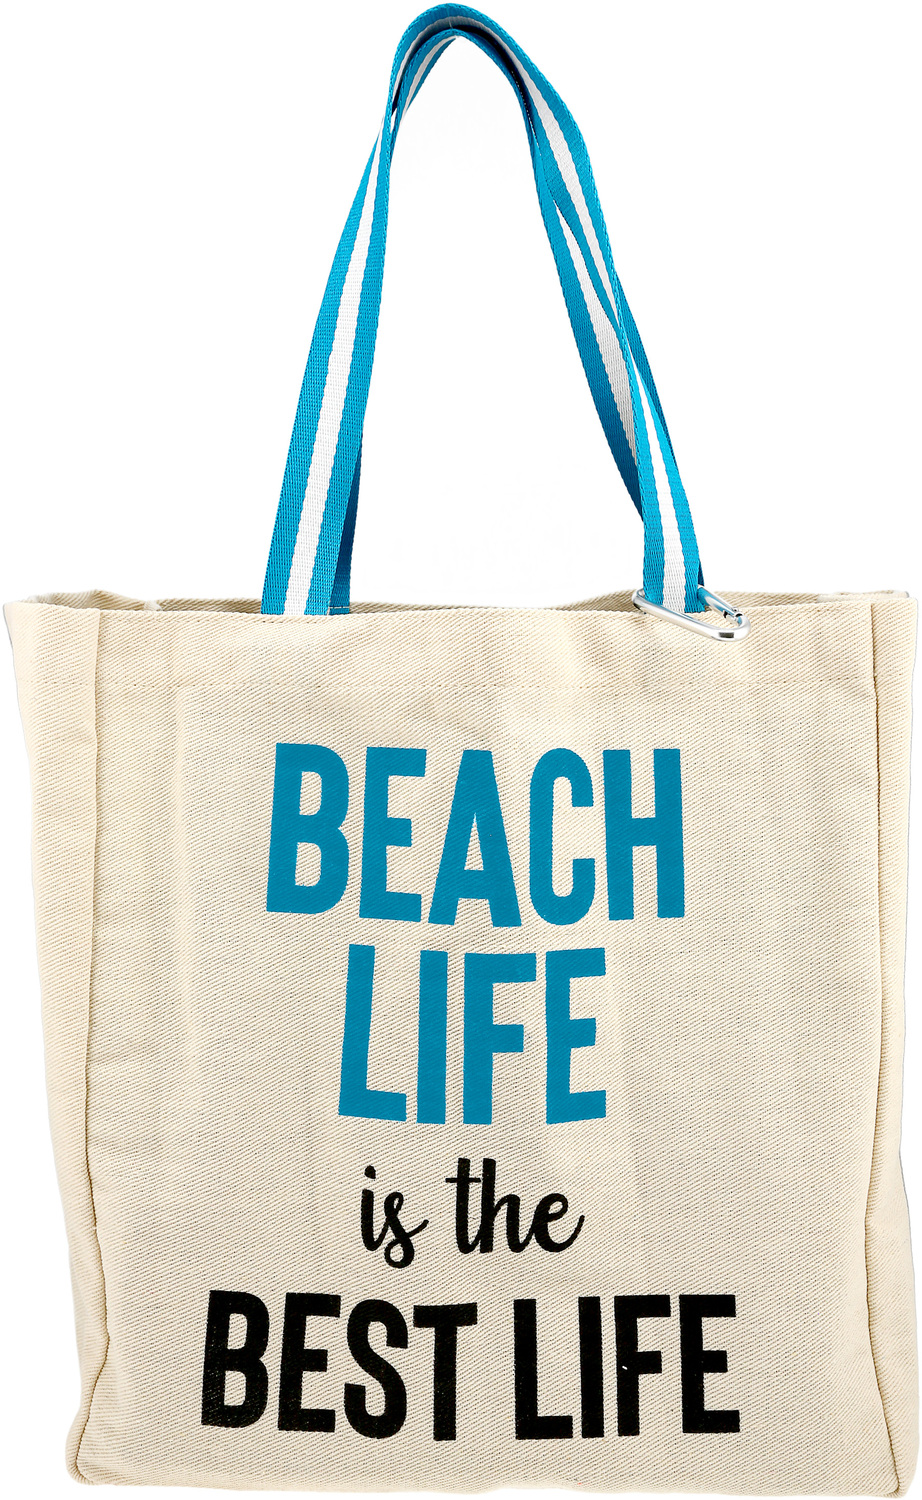 Beach Life by Check Me Out - Beach Life - 100% Cotton Twill Gift Bag